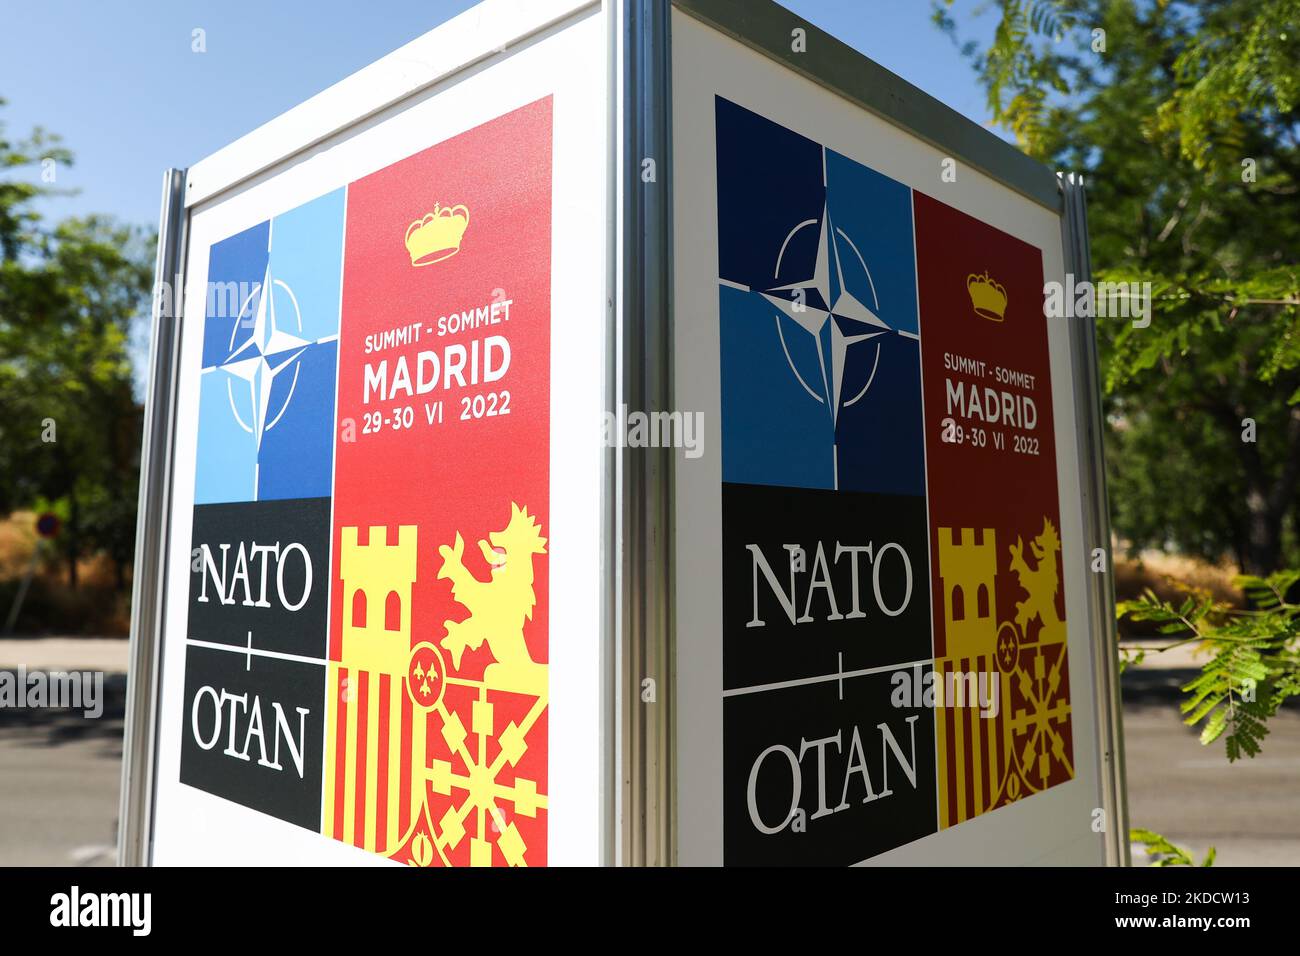 NATO Madrid 2022 Summit emblem is seen on a board near the venue two days before the event start, in Madrid, Span on June 27, 2022. (Photo by Jakub Porzycki/NurPhoto) Stock Photo